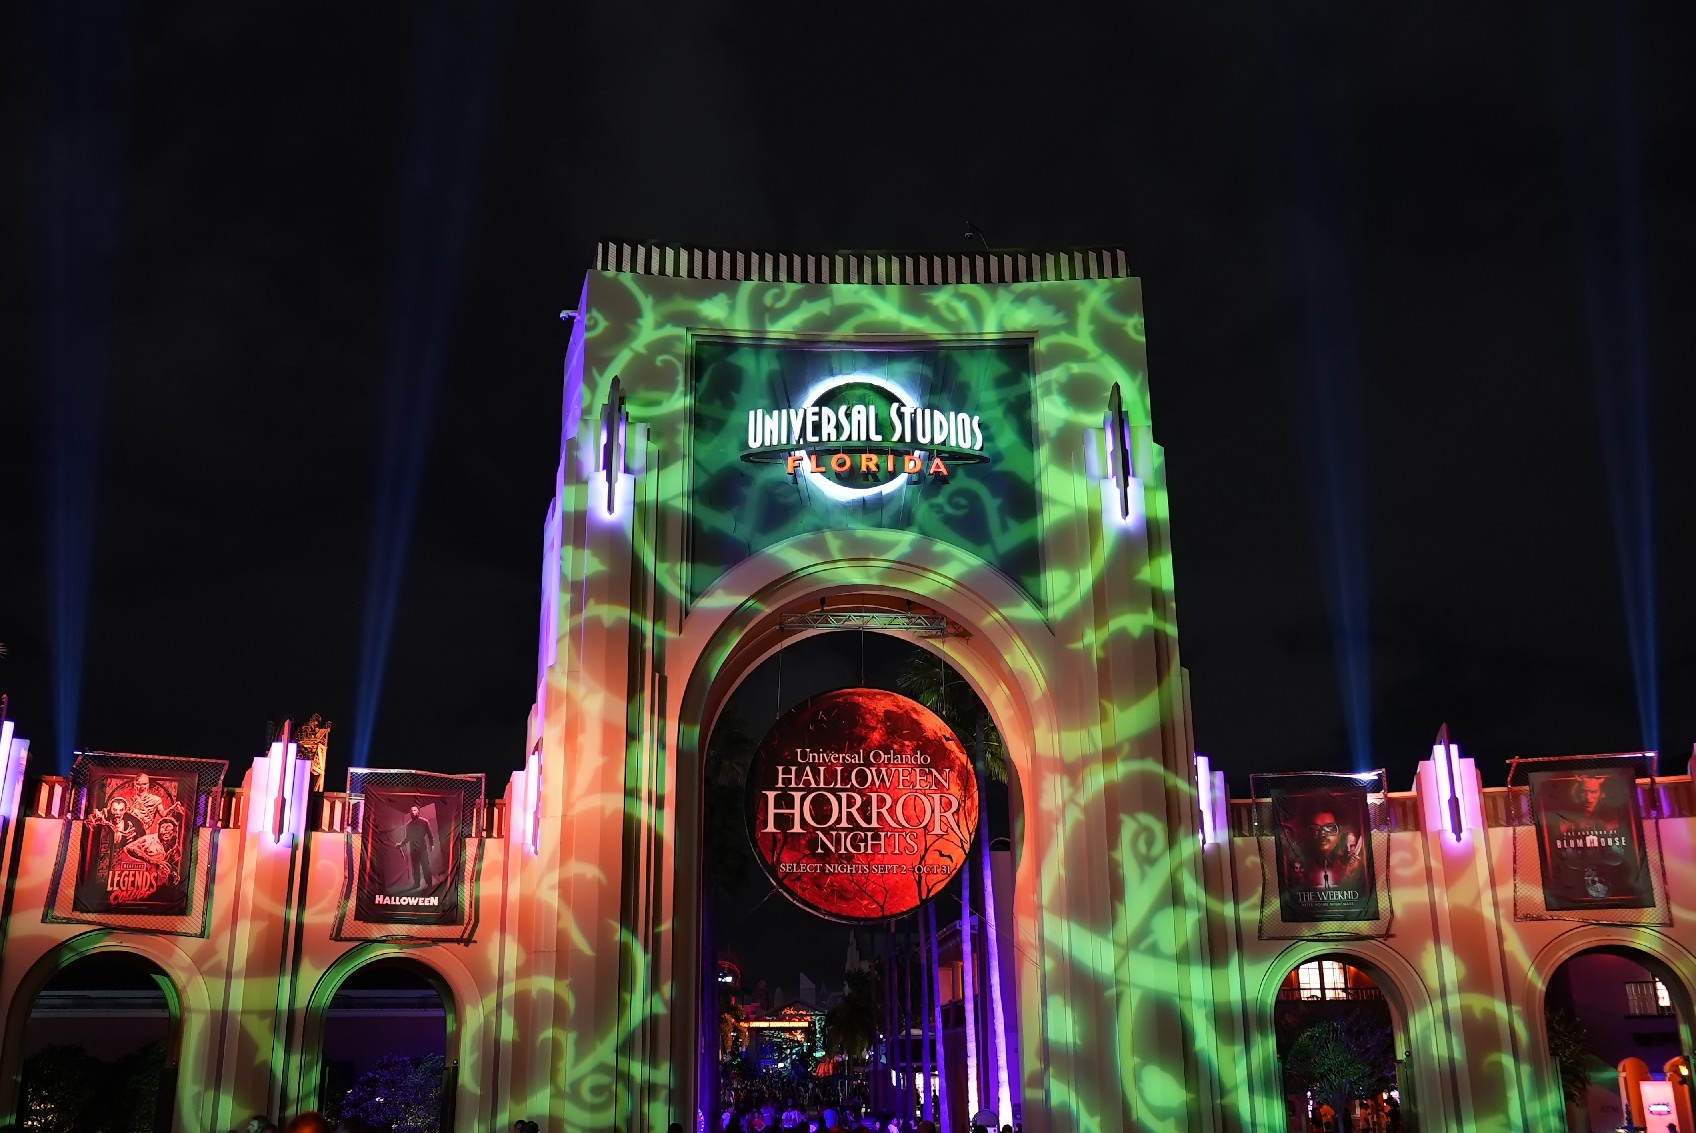 Universal Orlando adds Two Event Dates for Halloween Horror Nights 31